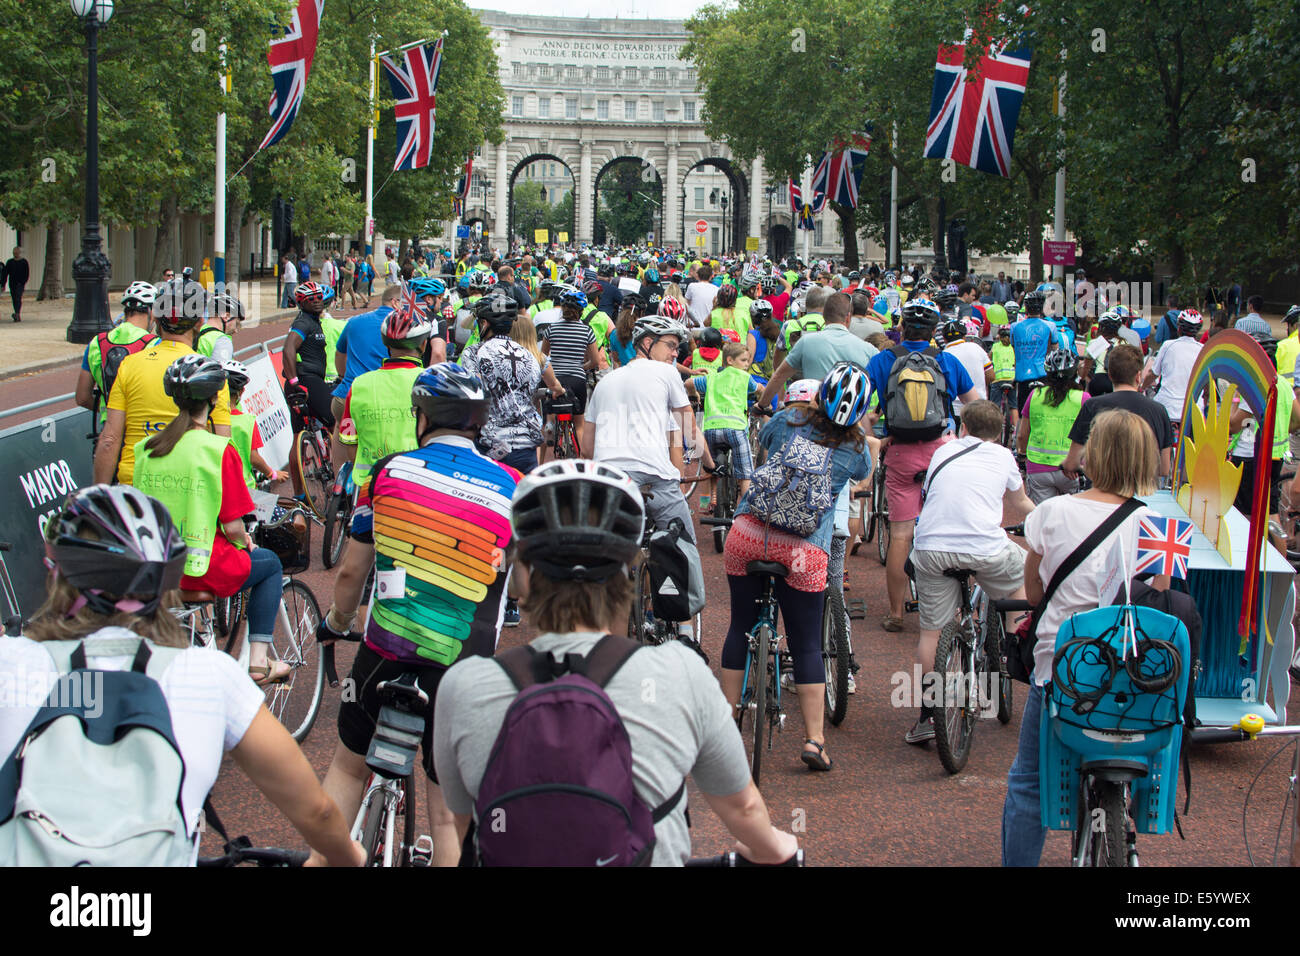 London, UK. 9th August, 2014. Cyclists participating in the Prudential Ride London event on Saturday 9th August, London, United Kingdom Credit:  doniphane dupriez/Alamy Live News Stock Photo